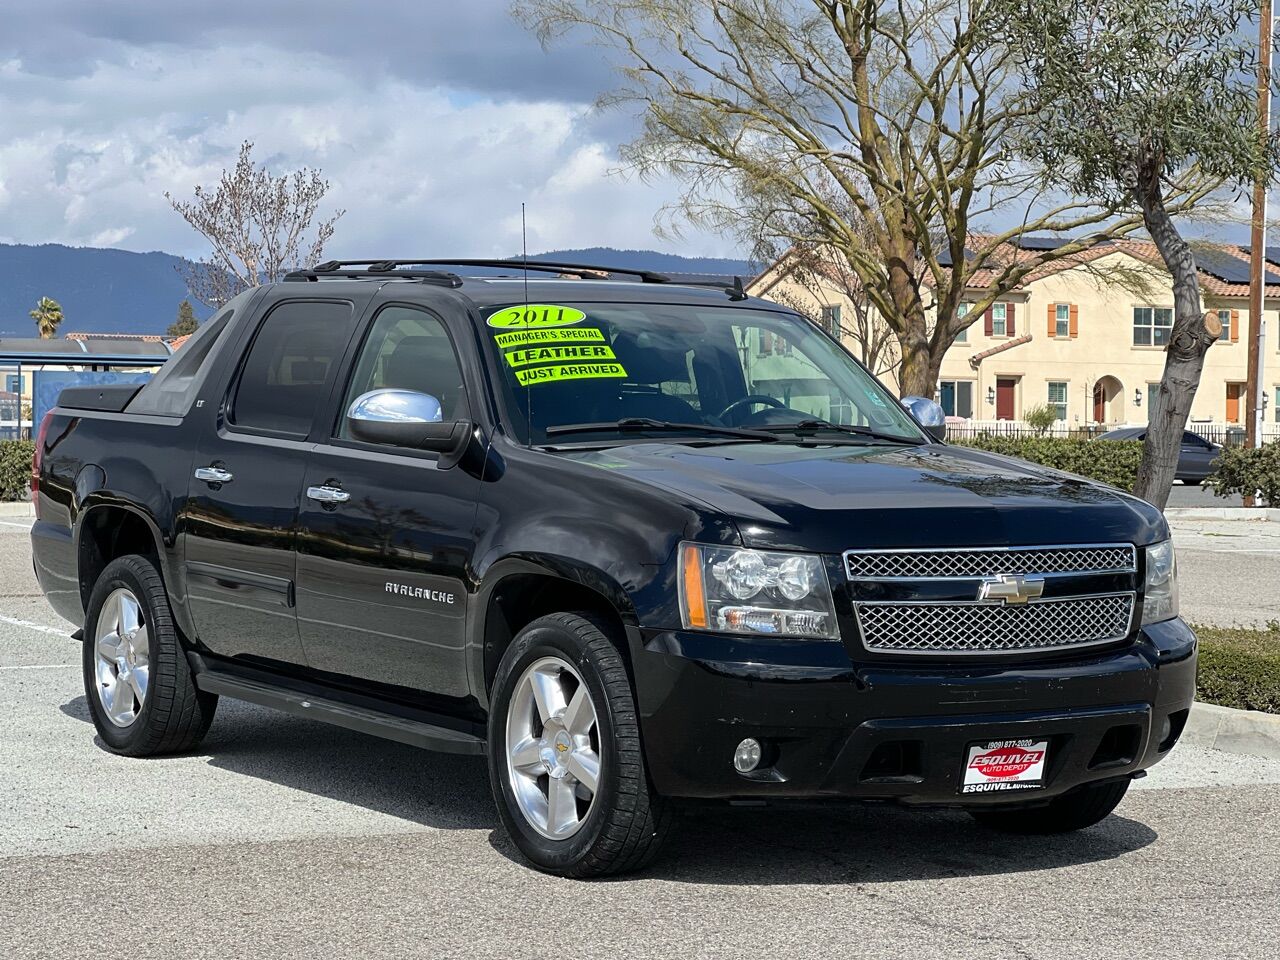 2011 Chevrolet Avalanche For Sale In Framingham, MA - Carsforsale.com®